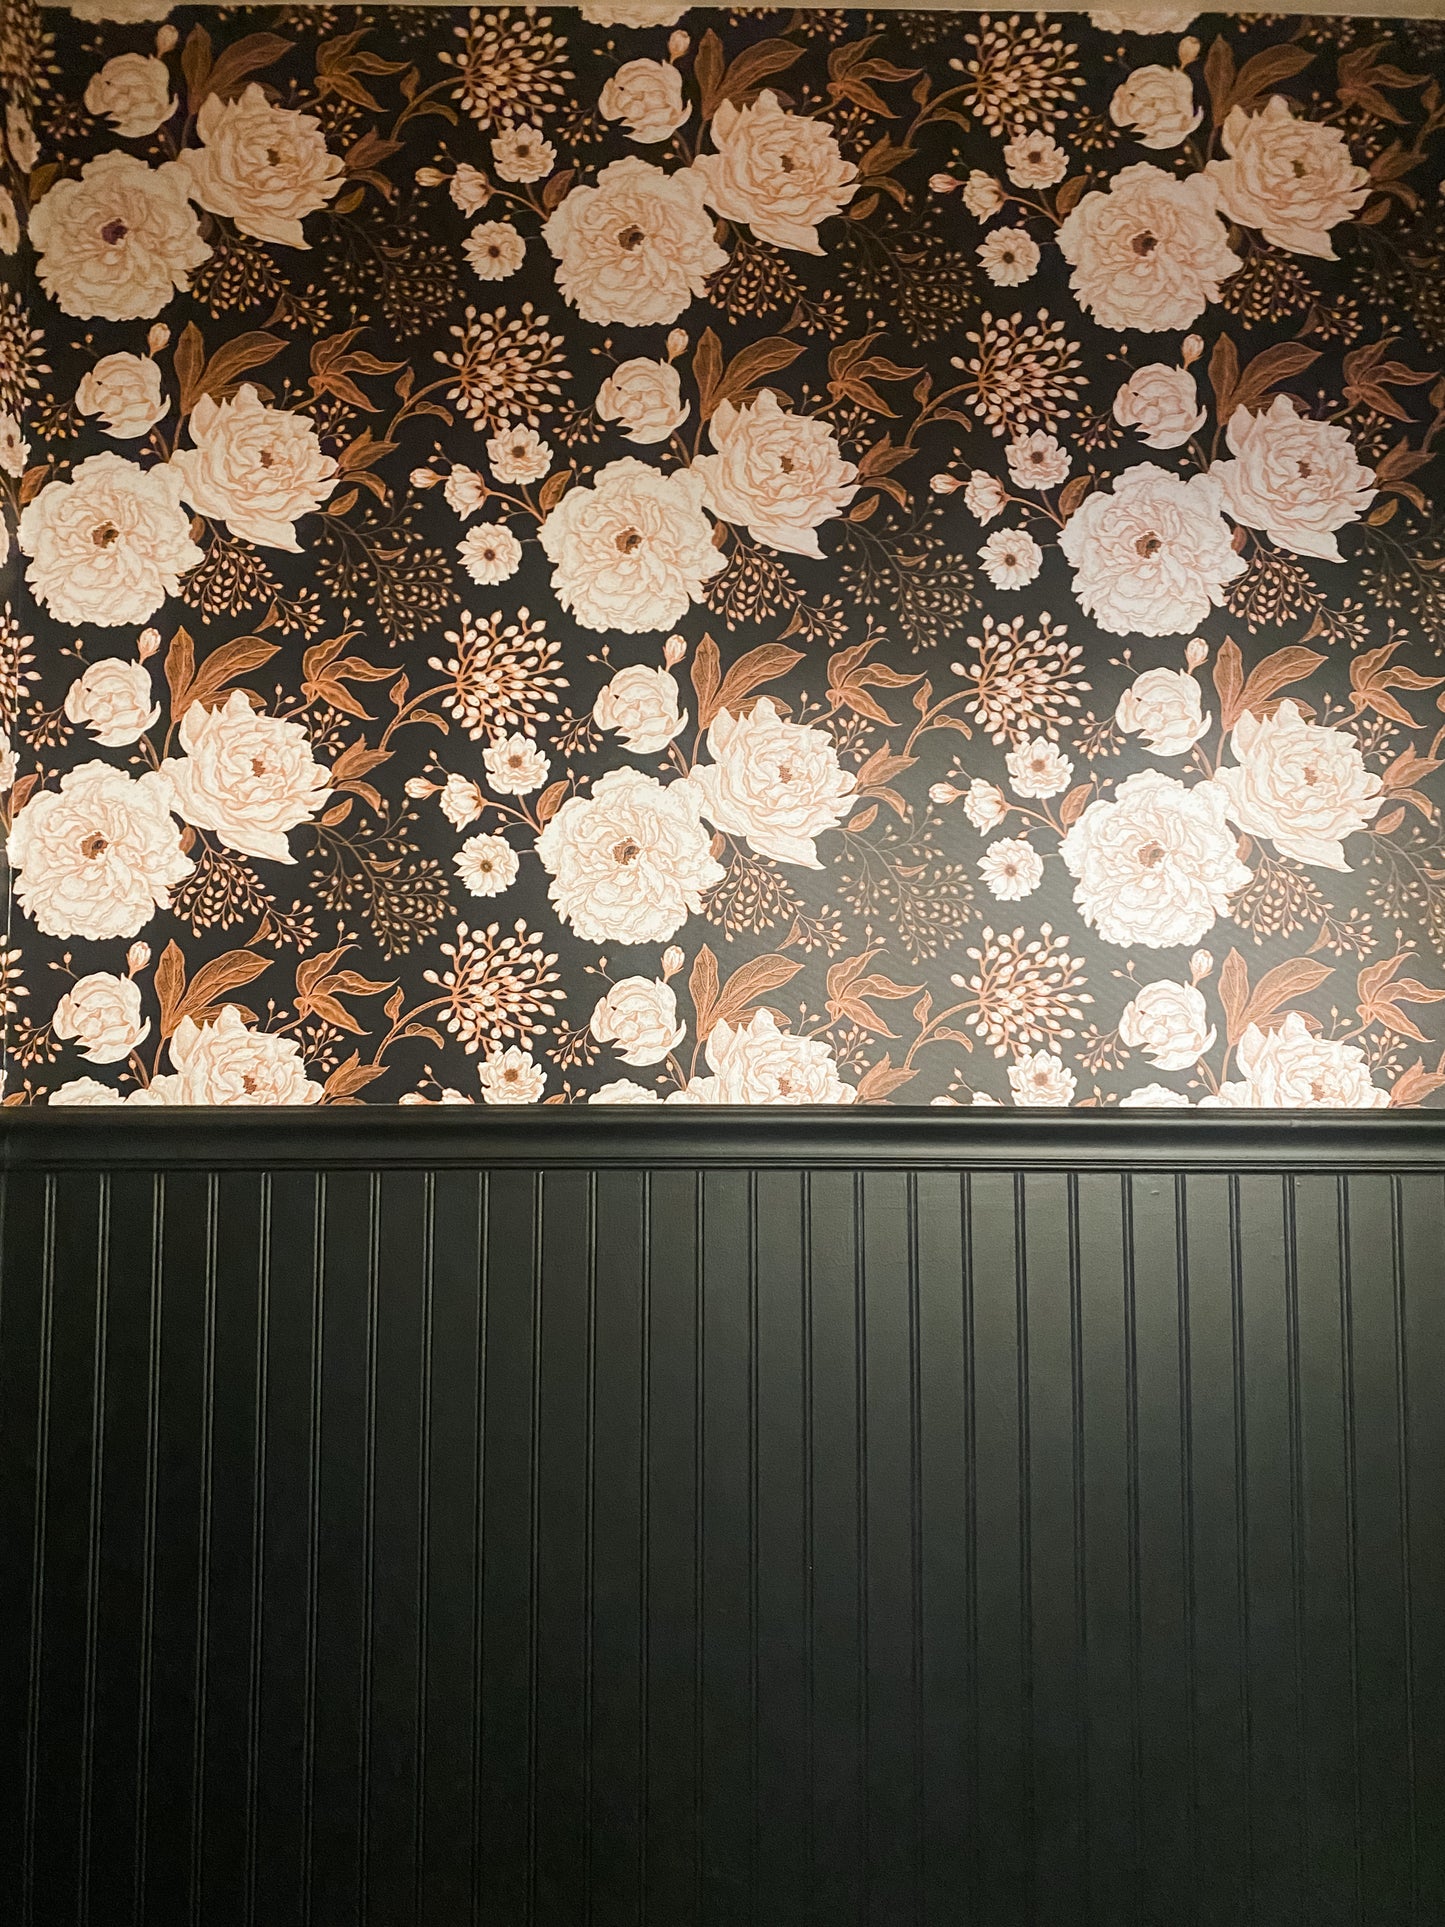 Midnight Floral - Peel and Stick Wallpaper